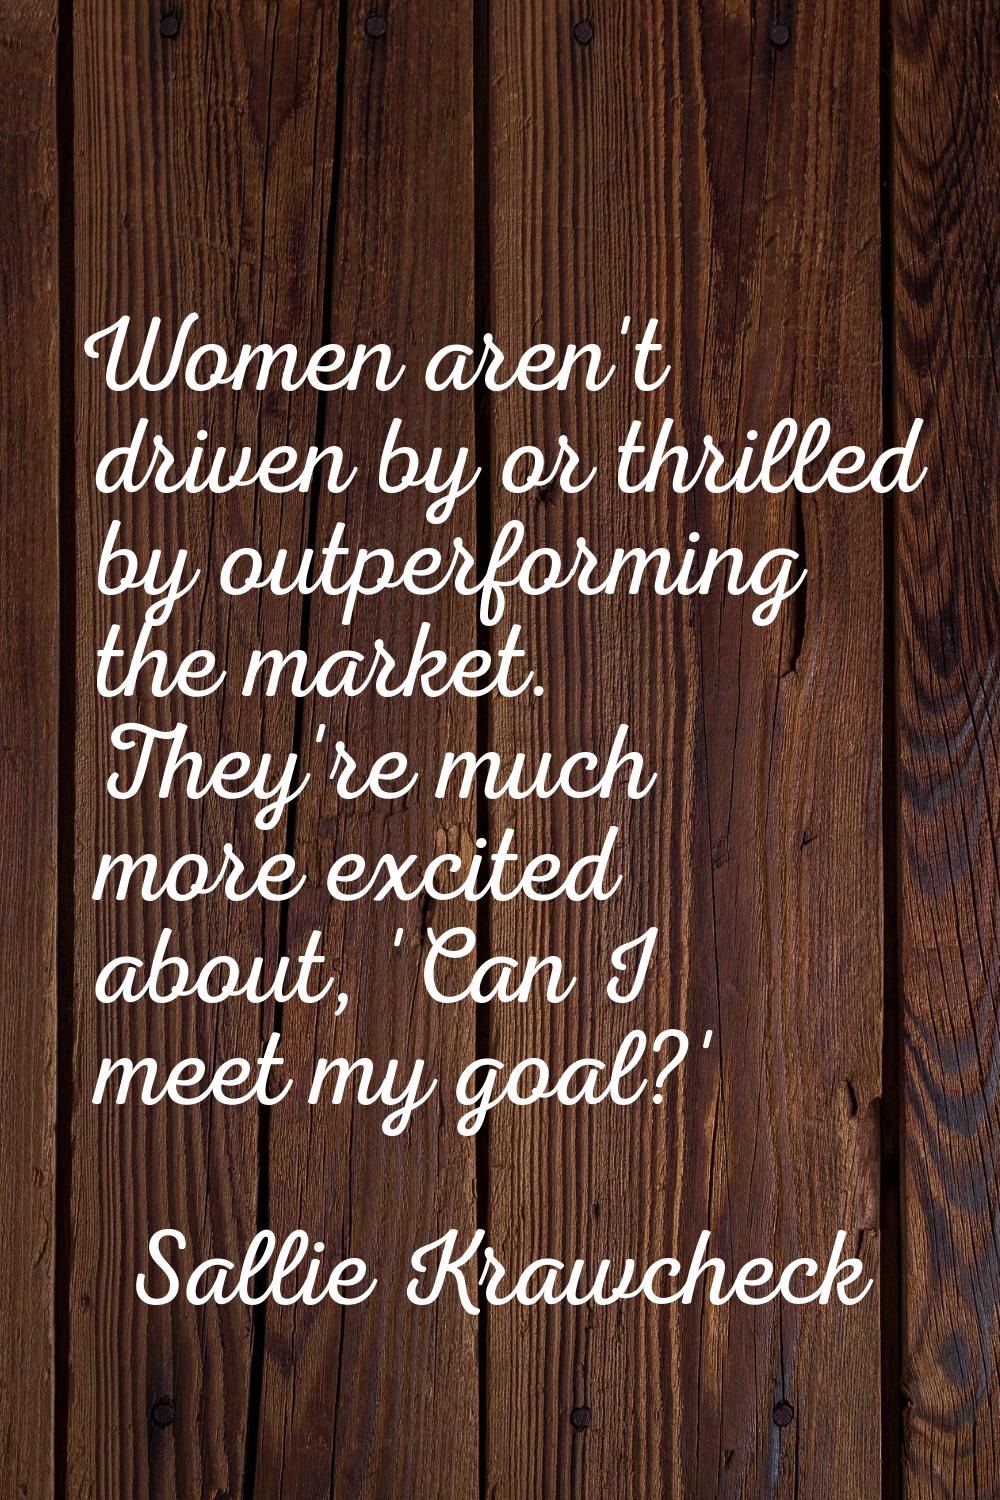 Women aren't driven by or thrilled by outperforming the market. They're much more excited about, 'C